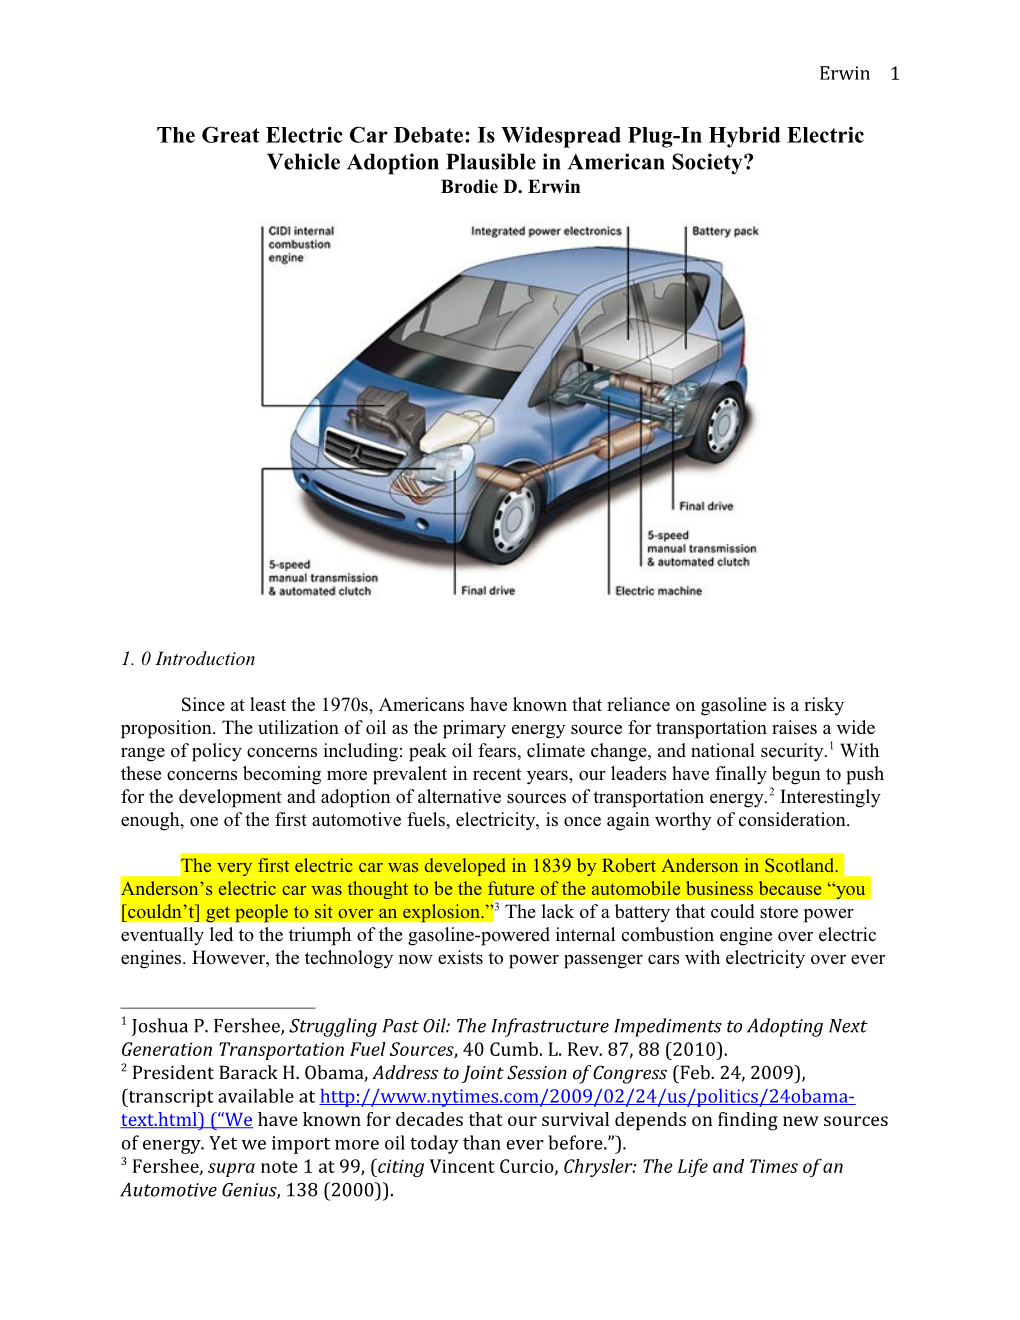 The Great Electric Car Debate: Is Widespread Plug-In Hybrid Electric Vehicle Adoption